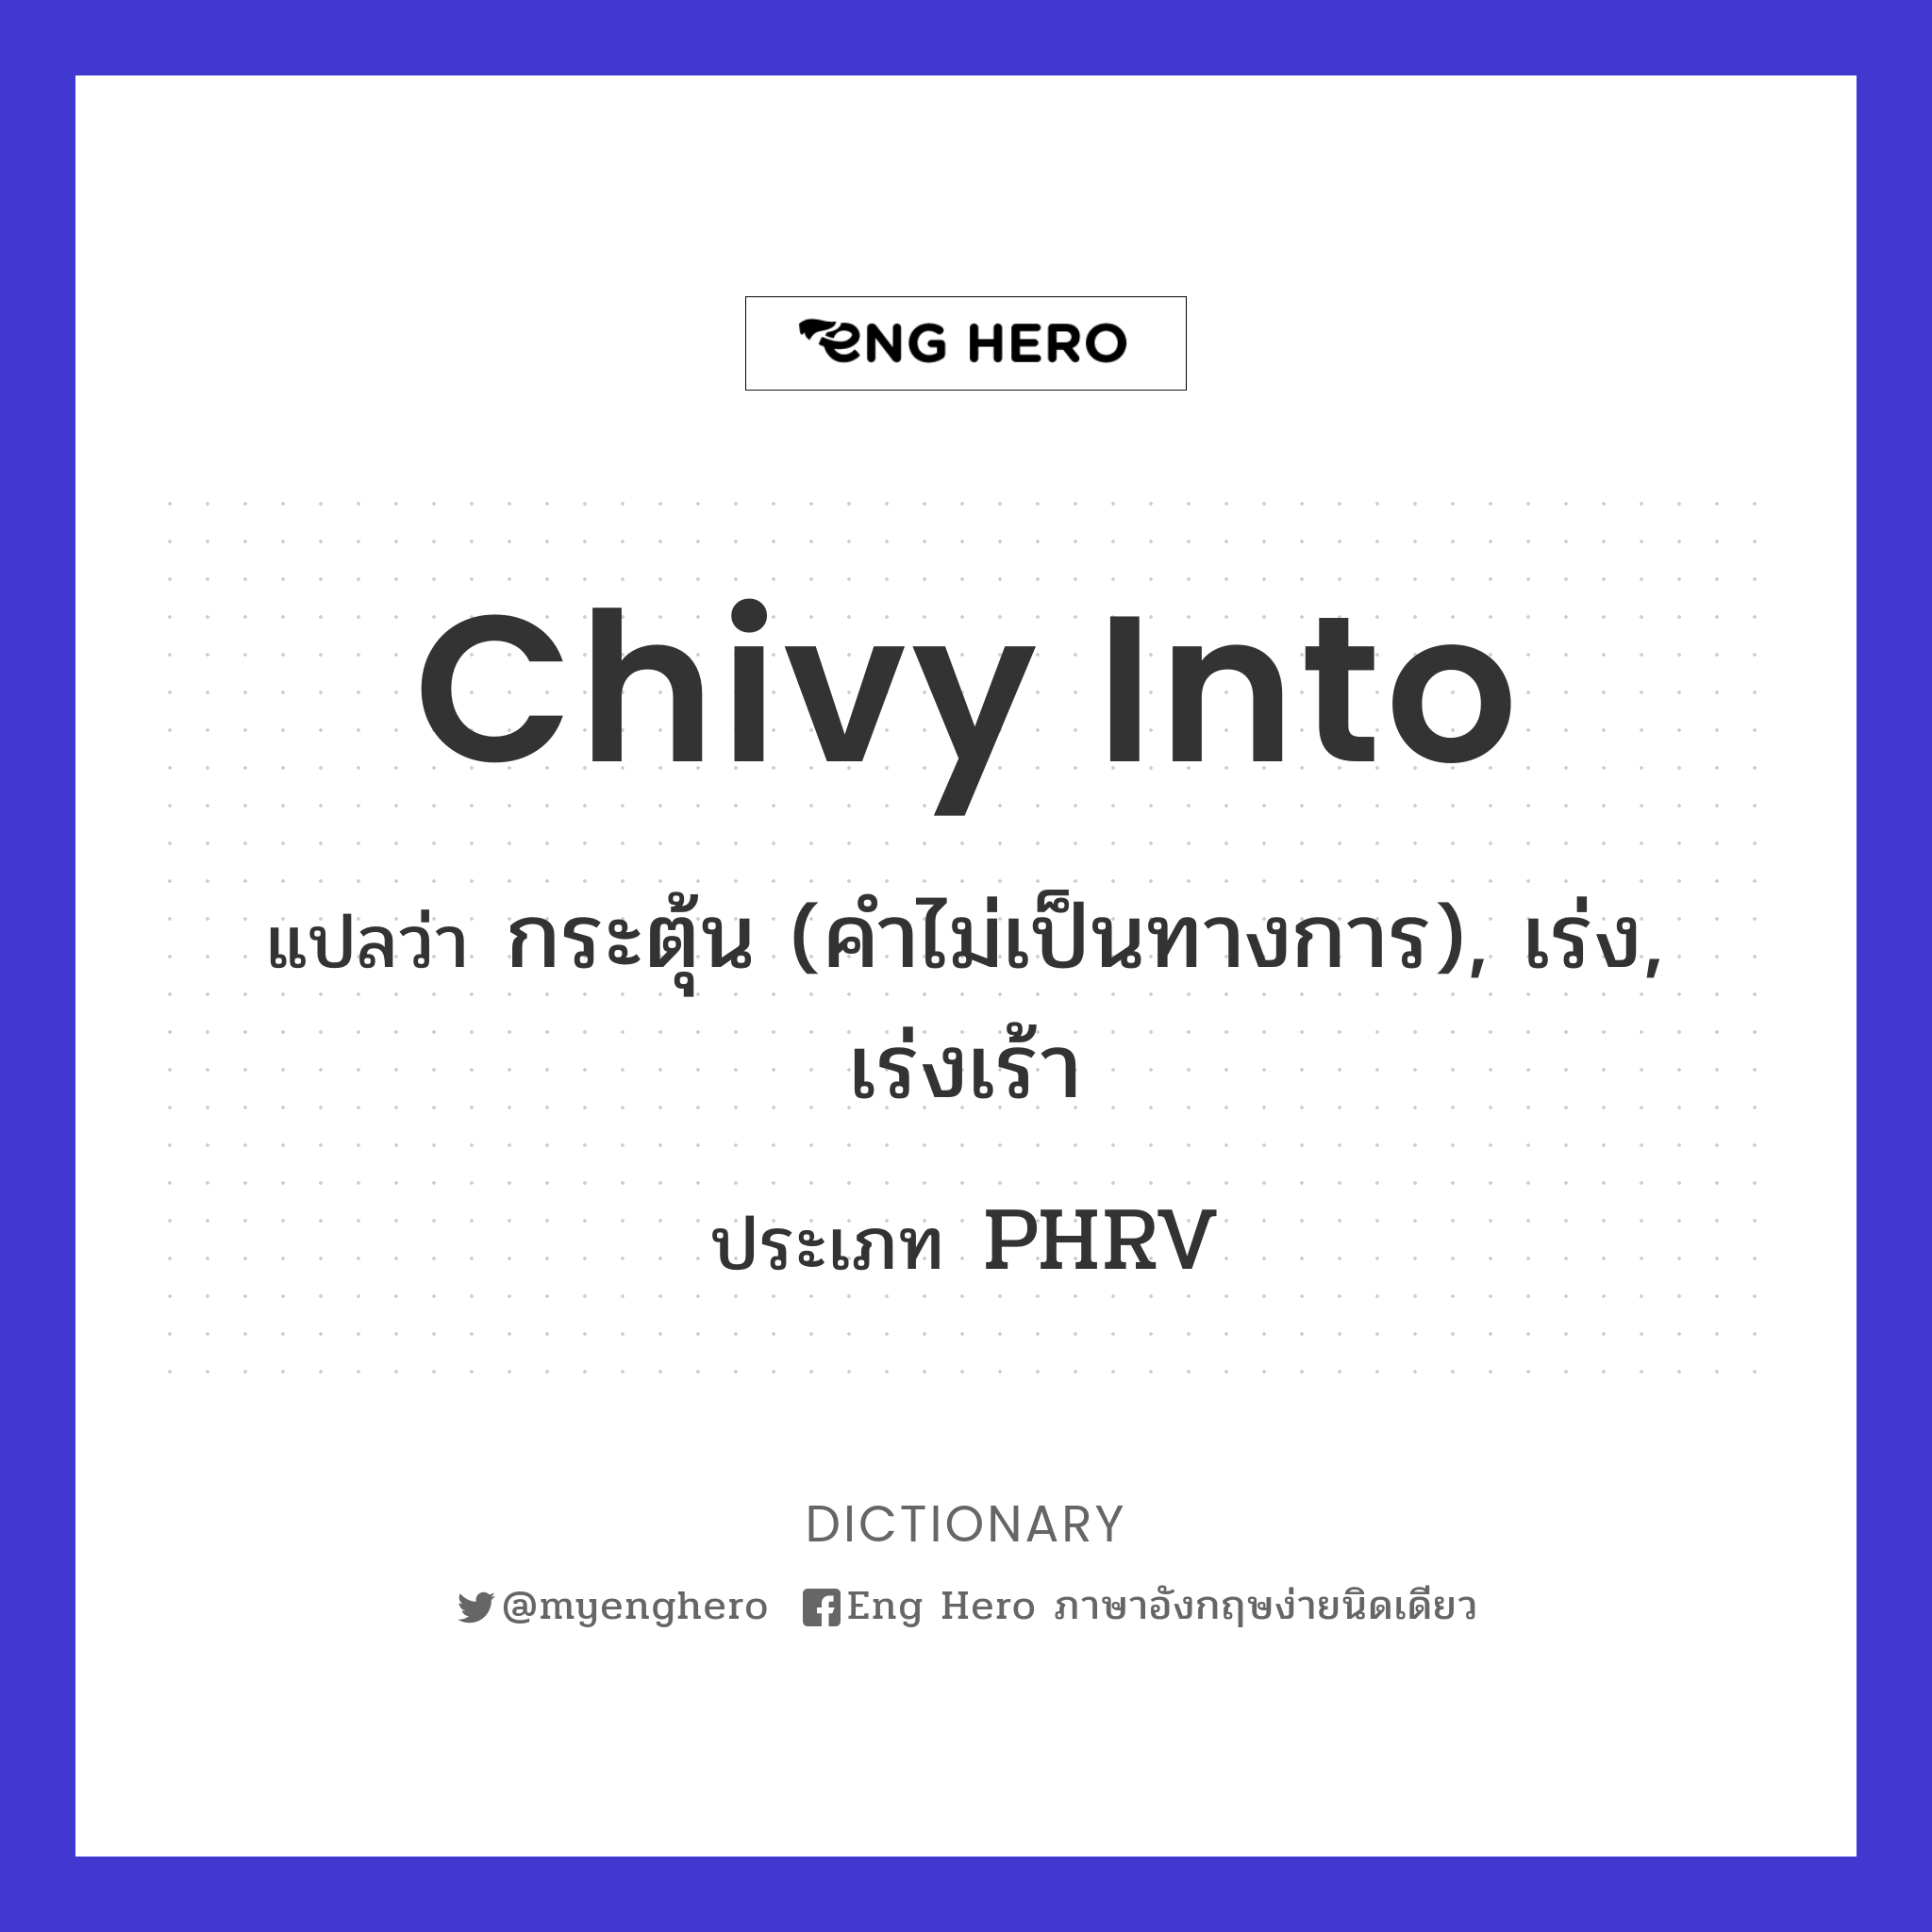 chivy into